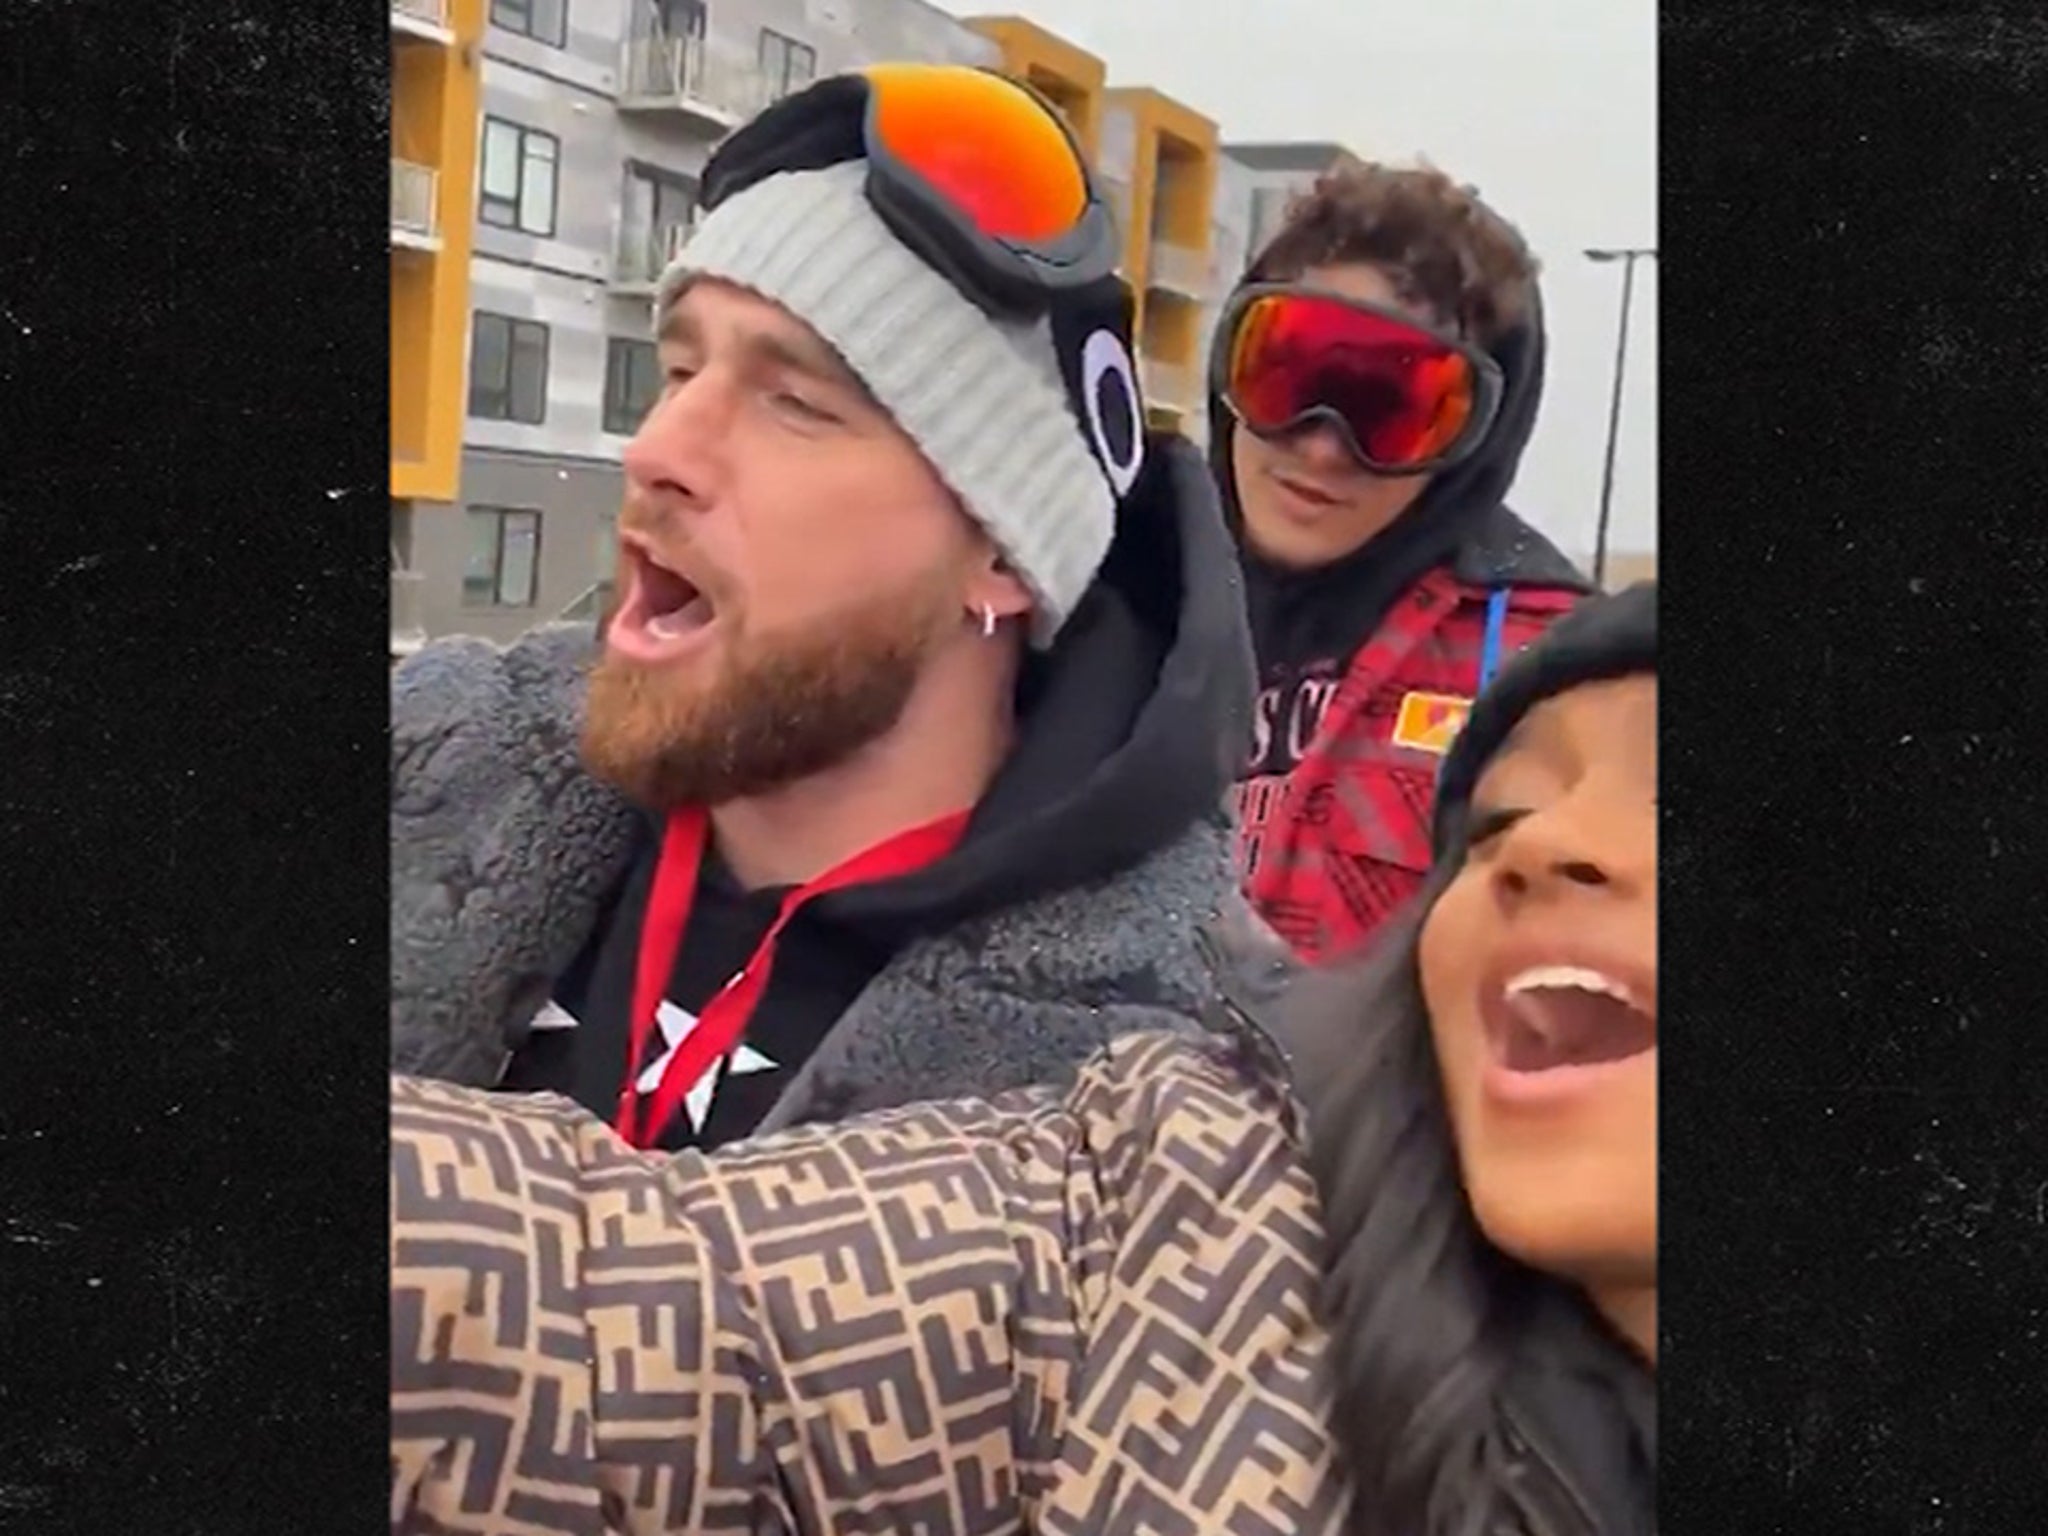 Travis Kelce Goes Full WWE Superstar, Gives Epic Speech At Chiefs